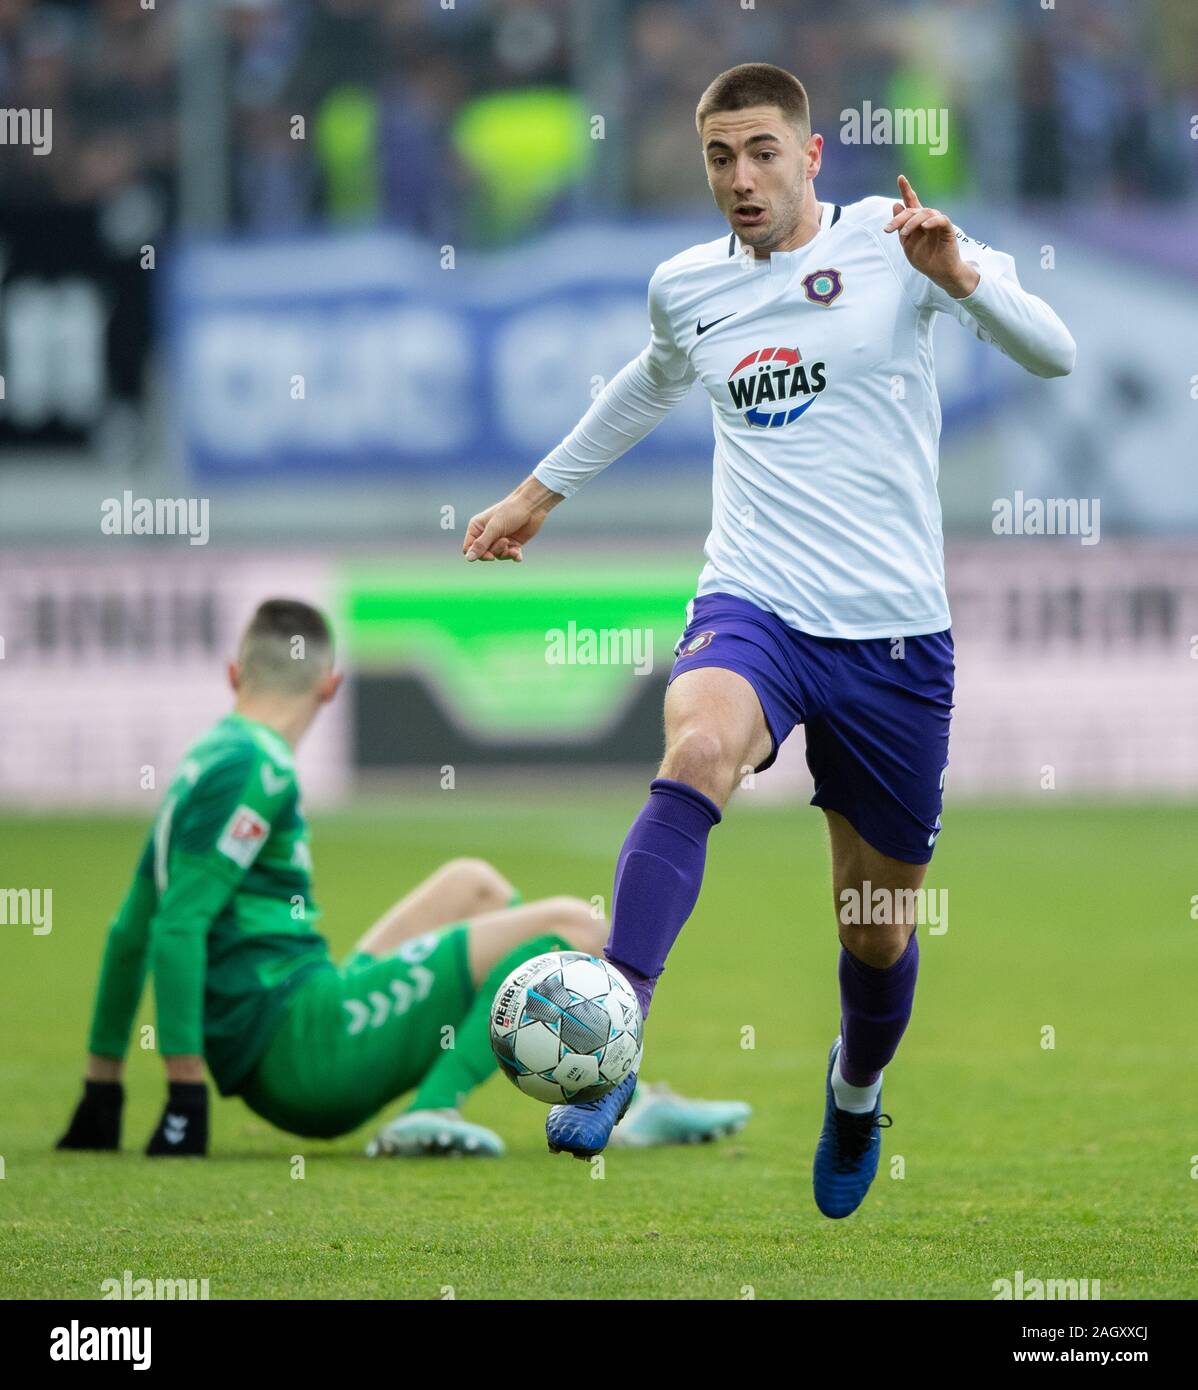 Aue, Germany. 21st Dec, 2019. Football: 2nd Bundesliga, FC Erzgebirge Aue - SpVgg Greuther Fürth, 18th matchday, at the Sparkassen-Erzgebirgsstadion. Aues Marko Mihojevic plays the ball. Credit: Robert Michael/dpa-Zentralbild/dpa - IMPORTANT NOTE: In accordance with the regulations of the DFL Deutsche Fußball Liga and the DFB Deutscher Fußball-Bund, it is prohibited to exploit or have exploited in the stadium and/or from the game taken photographs in the form of sequence images and/or video-like photo series./dpa/Alamy Live News Stock Photo